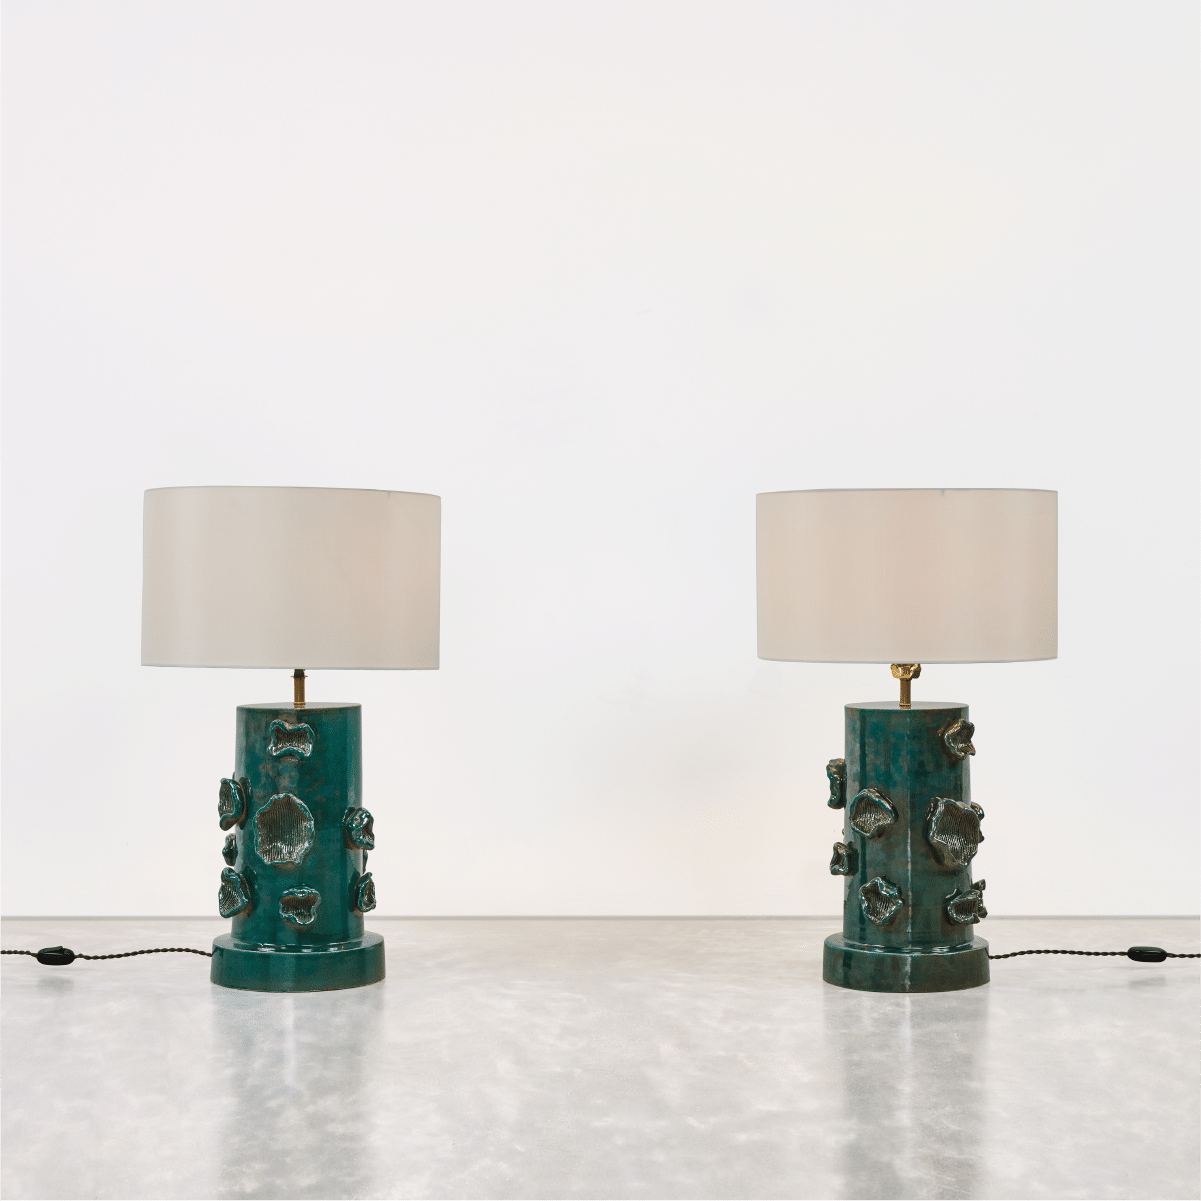 Low res for web_Pair of Monello Table Lamps-